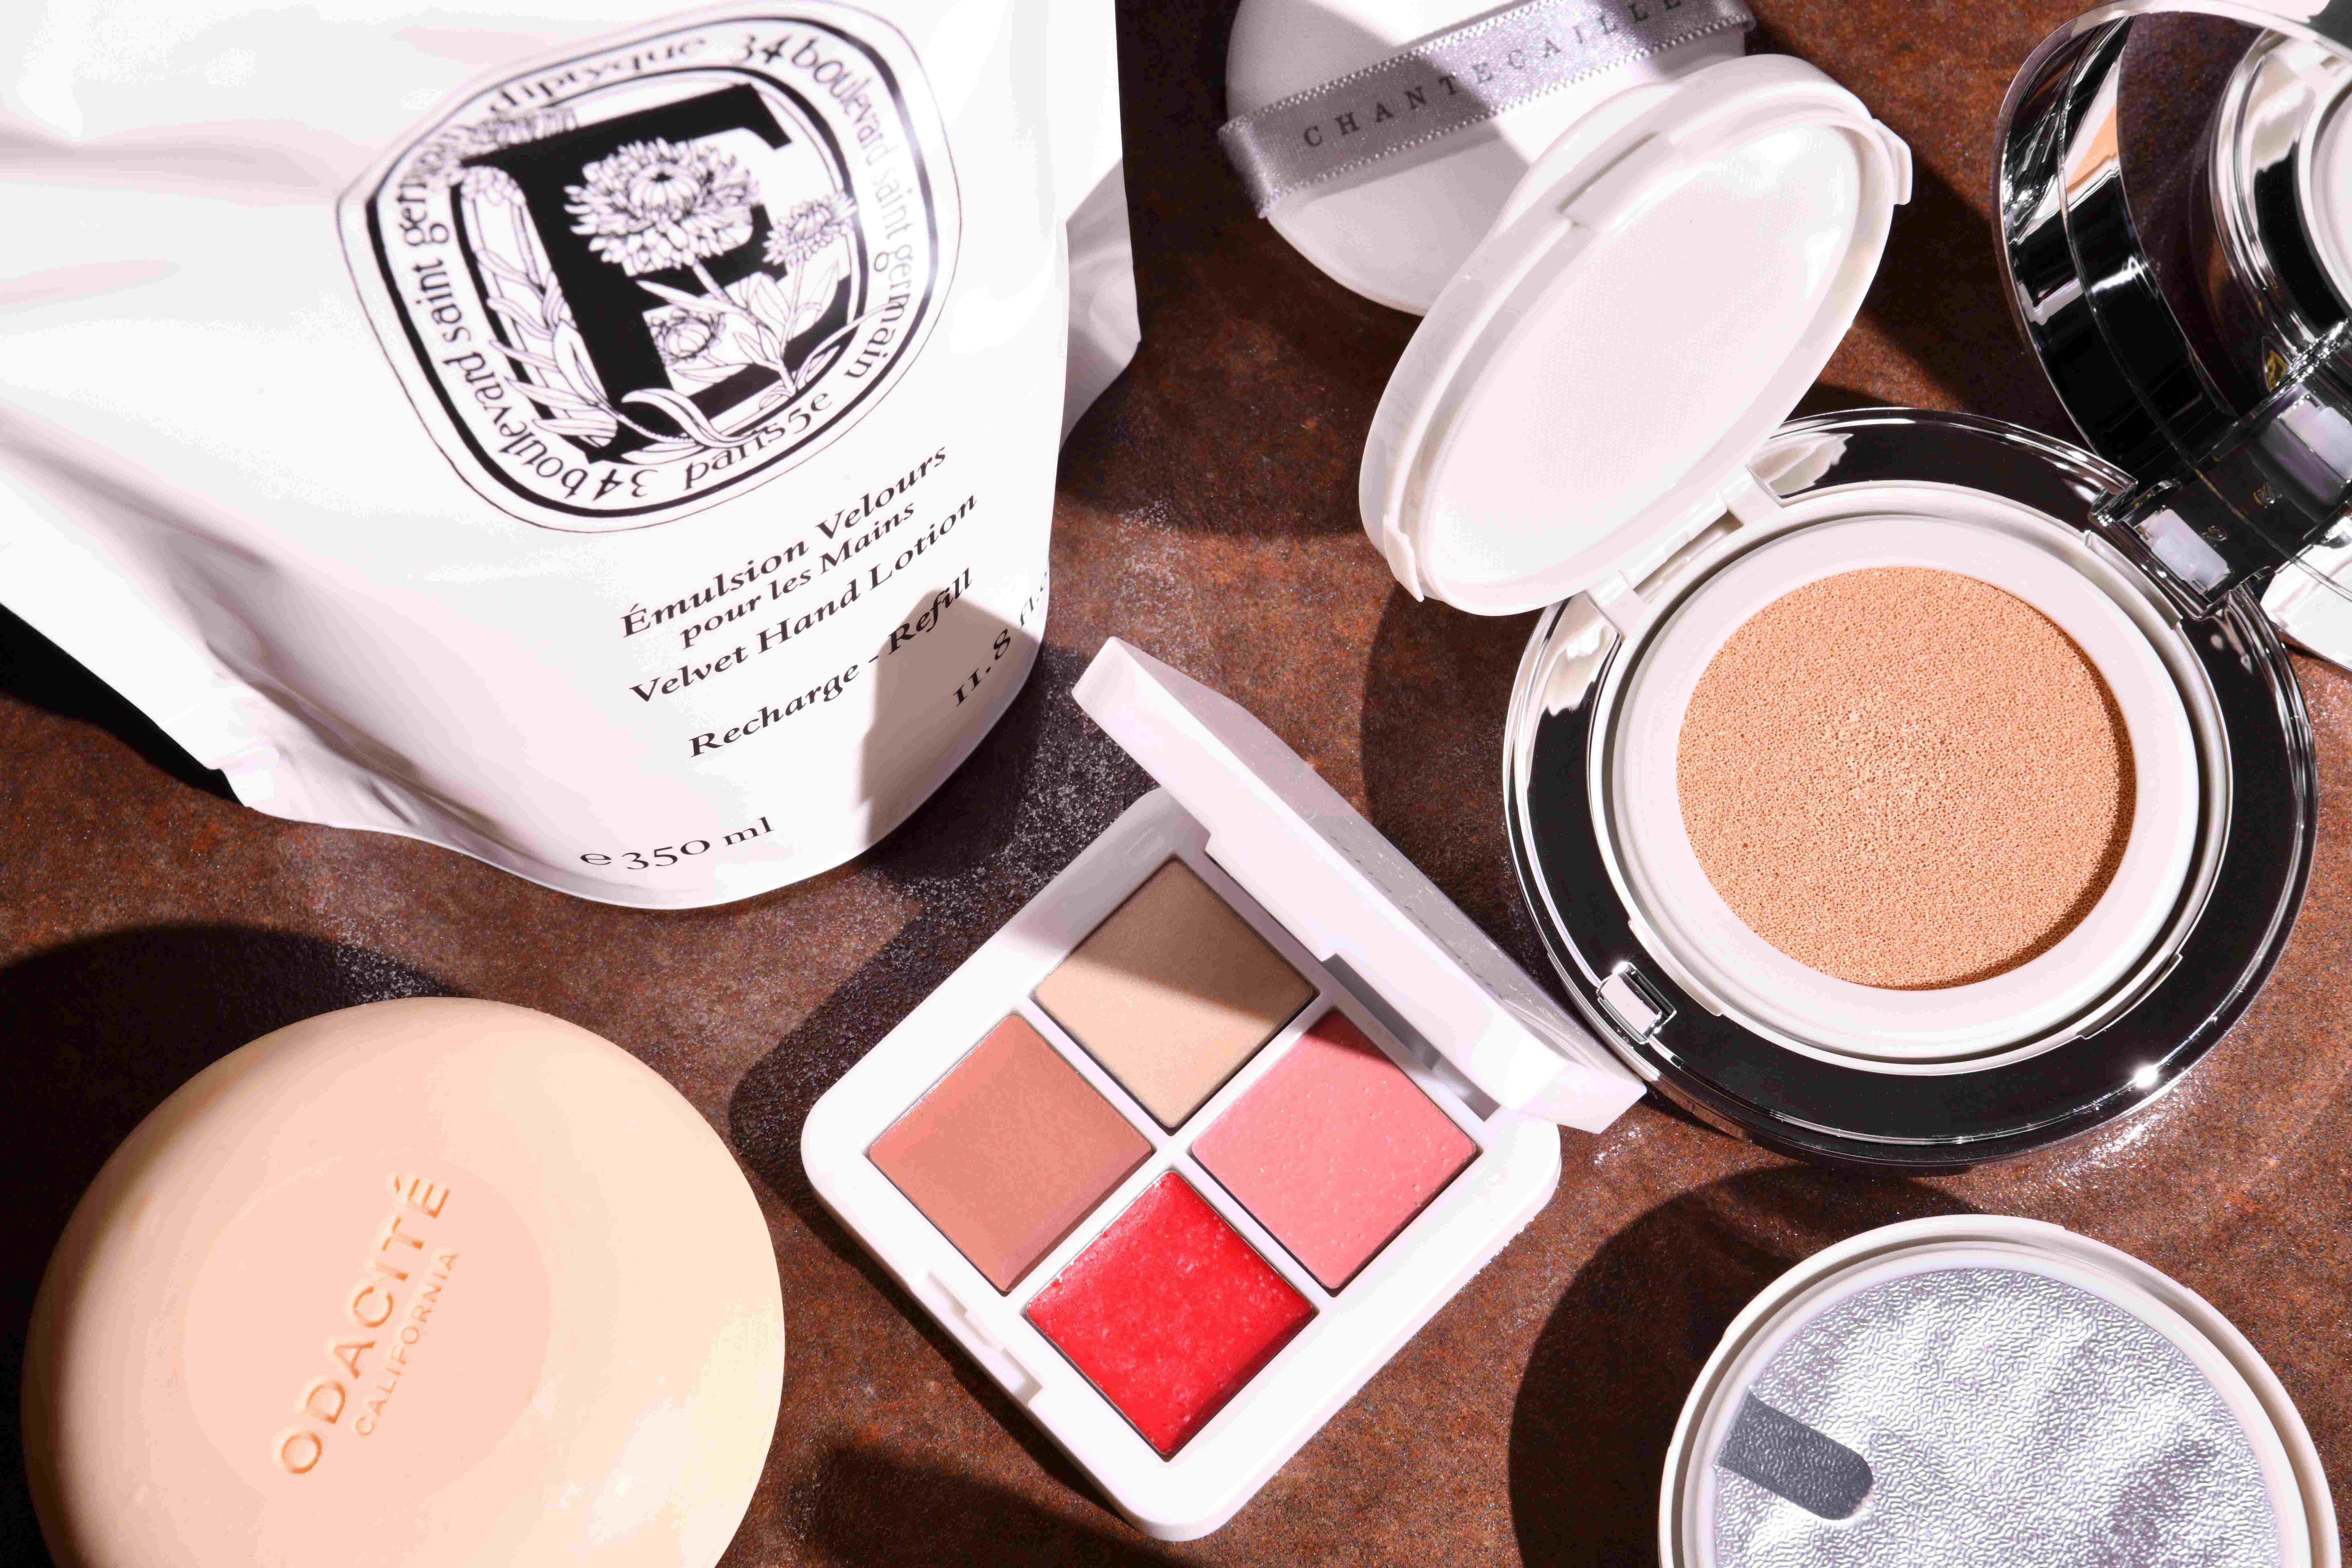 4 Easy Swaps To Make Your Beauty Routine More Sustainable